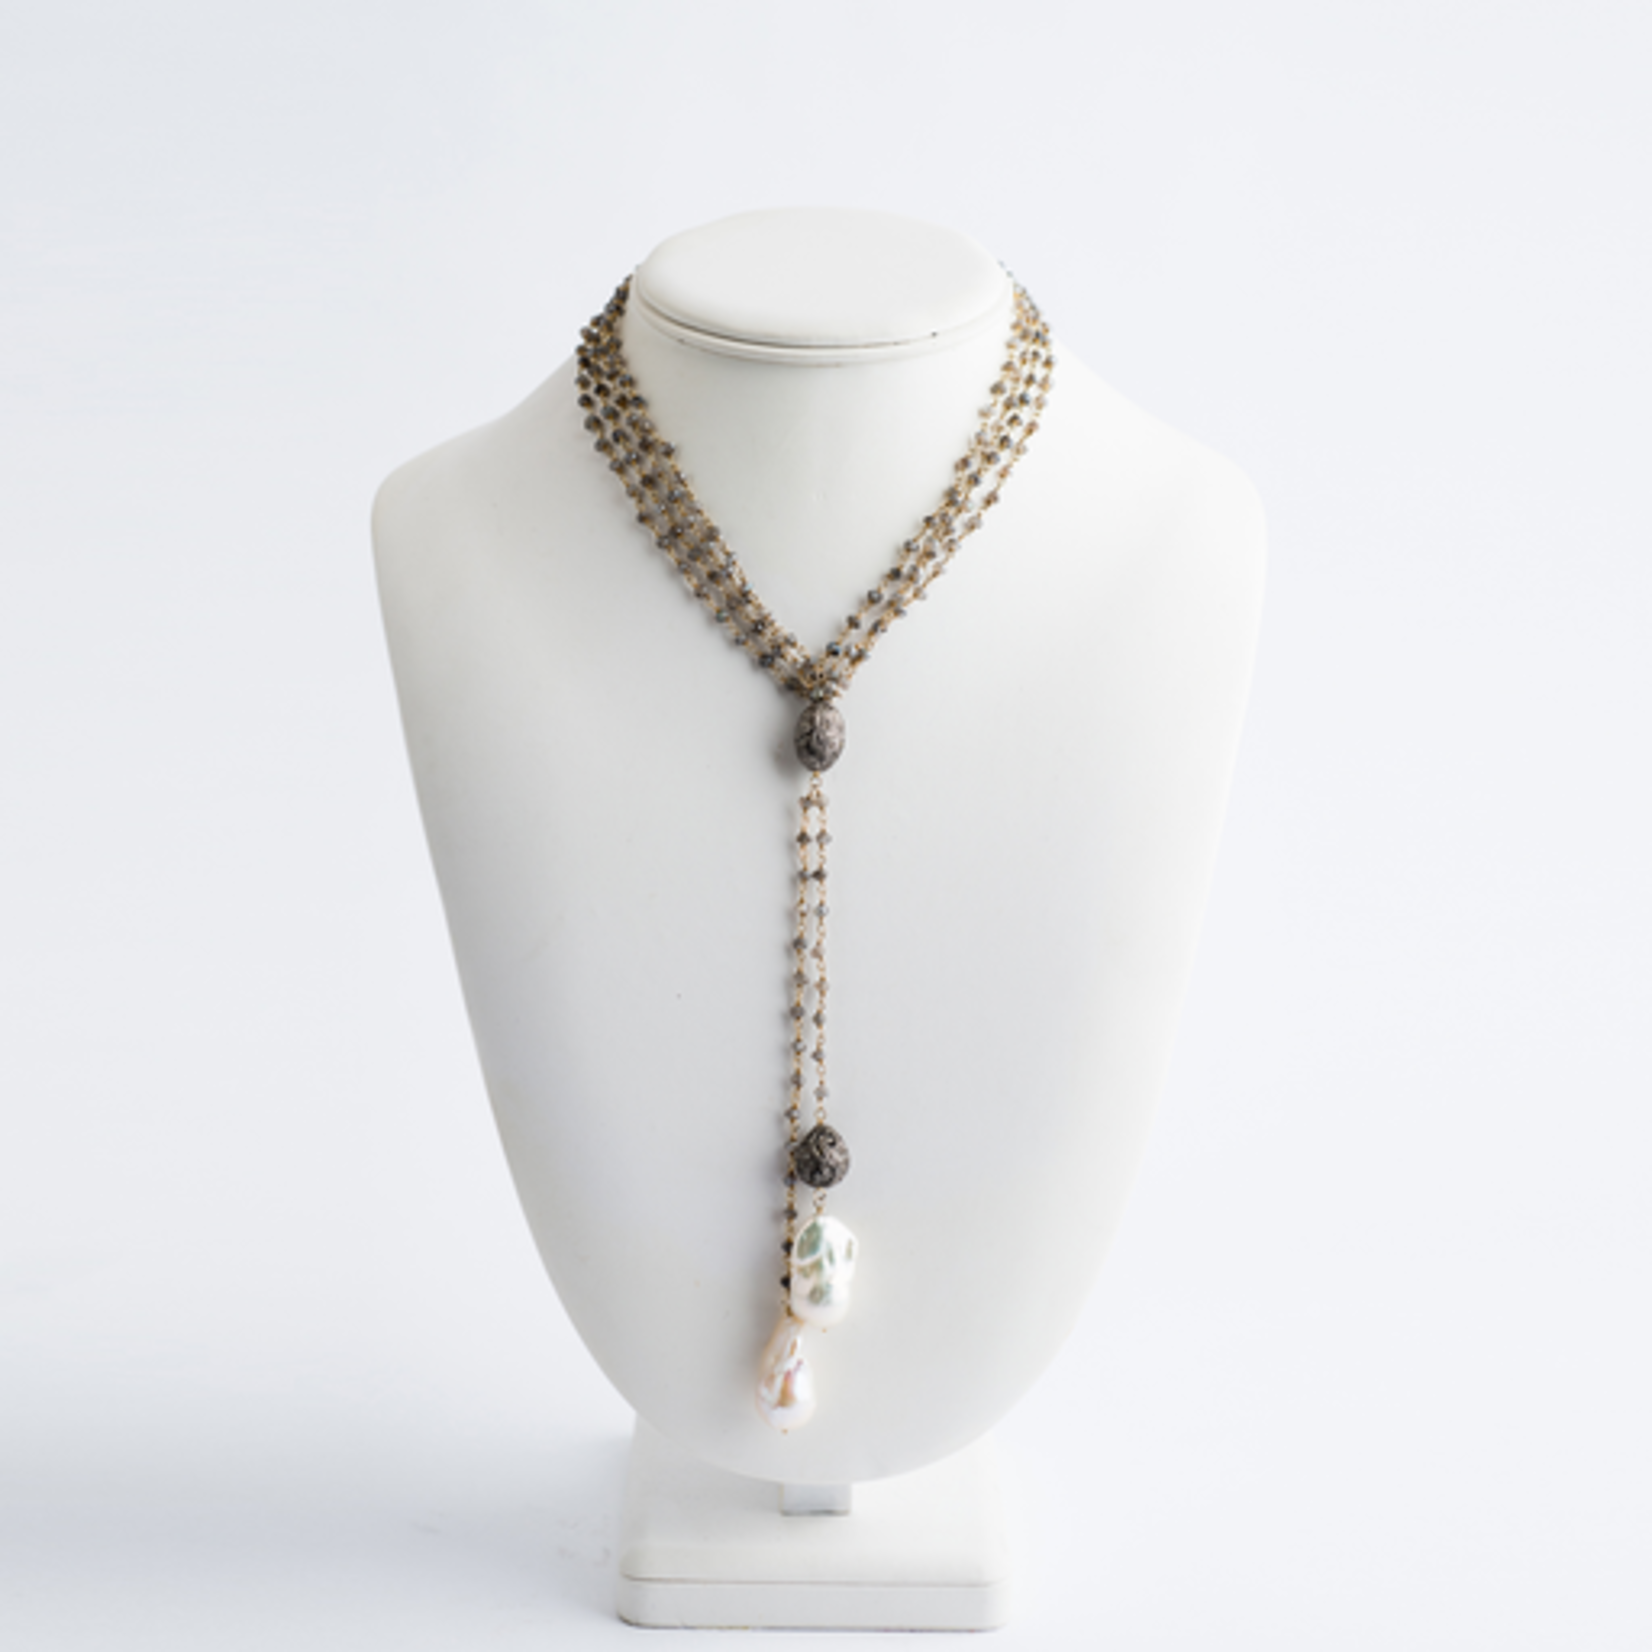 Mina Danielle Double Moonstone & Gold Chain with 2 Hanging Baroque Pearls and Diamond Bead. Can be worn long or as a lariat